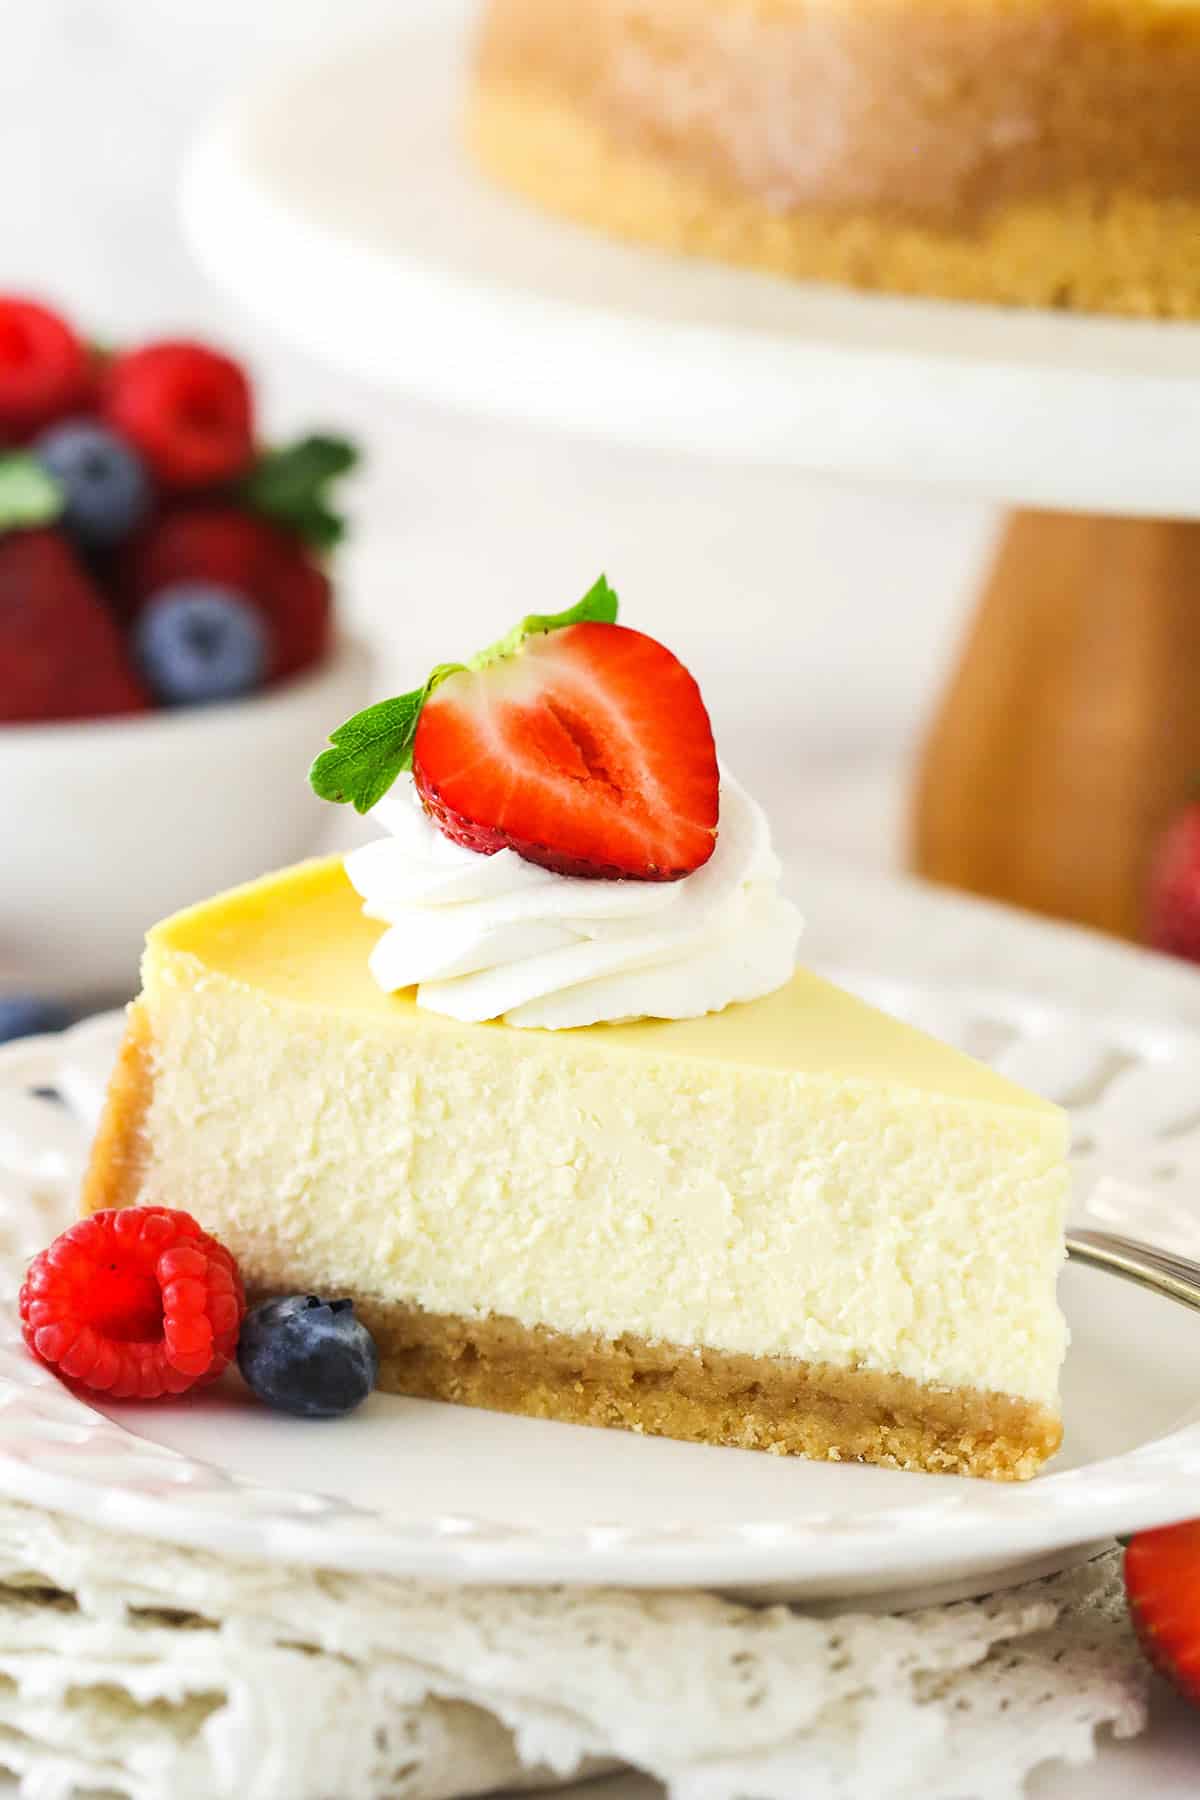 A slice of homemade cheesecake with whipped cream and berries